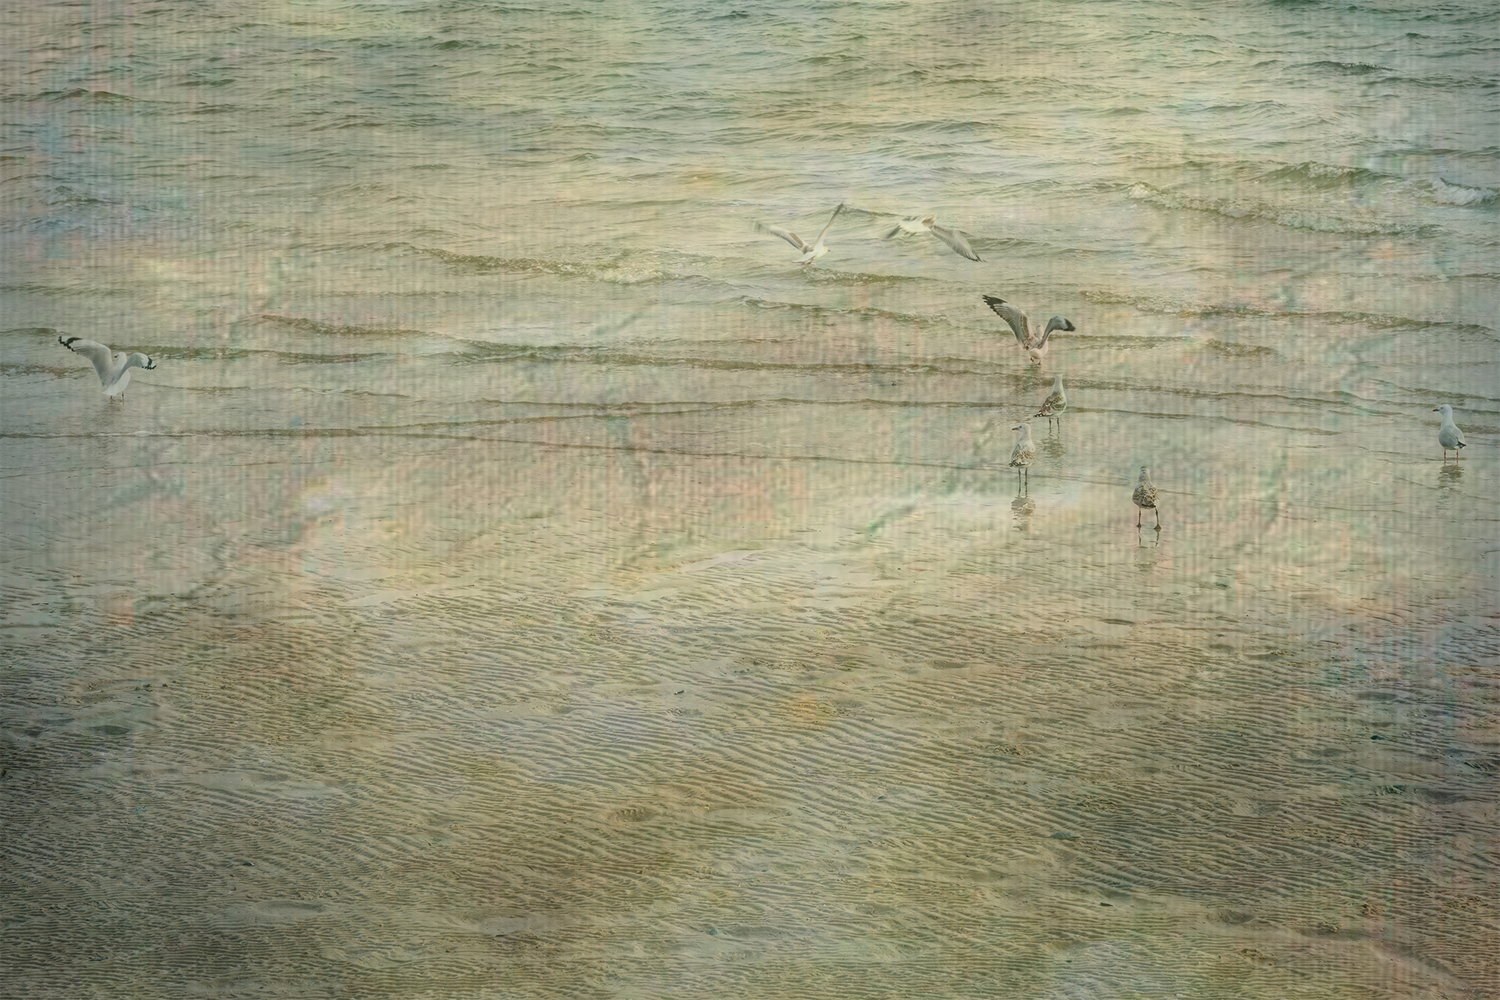 Colour photograph of seagulls standing in the water of a sea shoreline with a French Impressionist painterly effect.